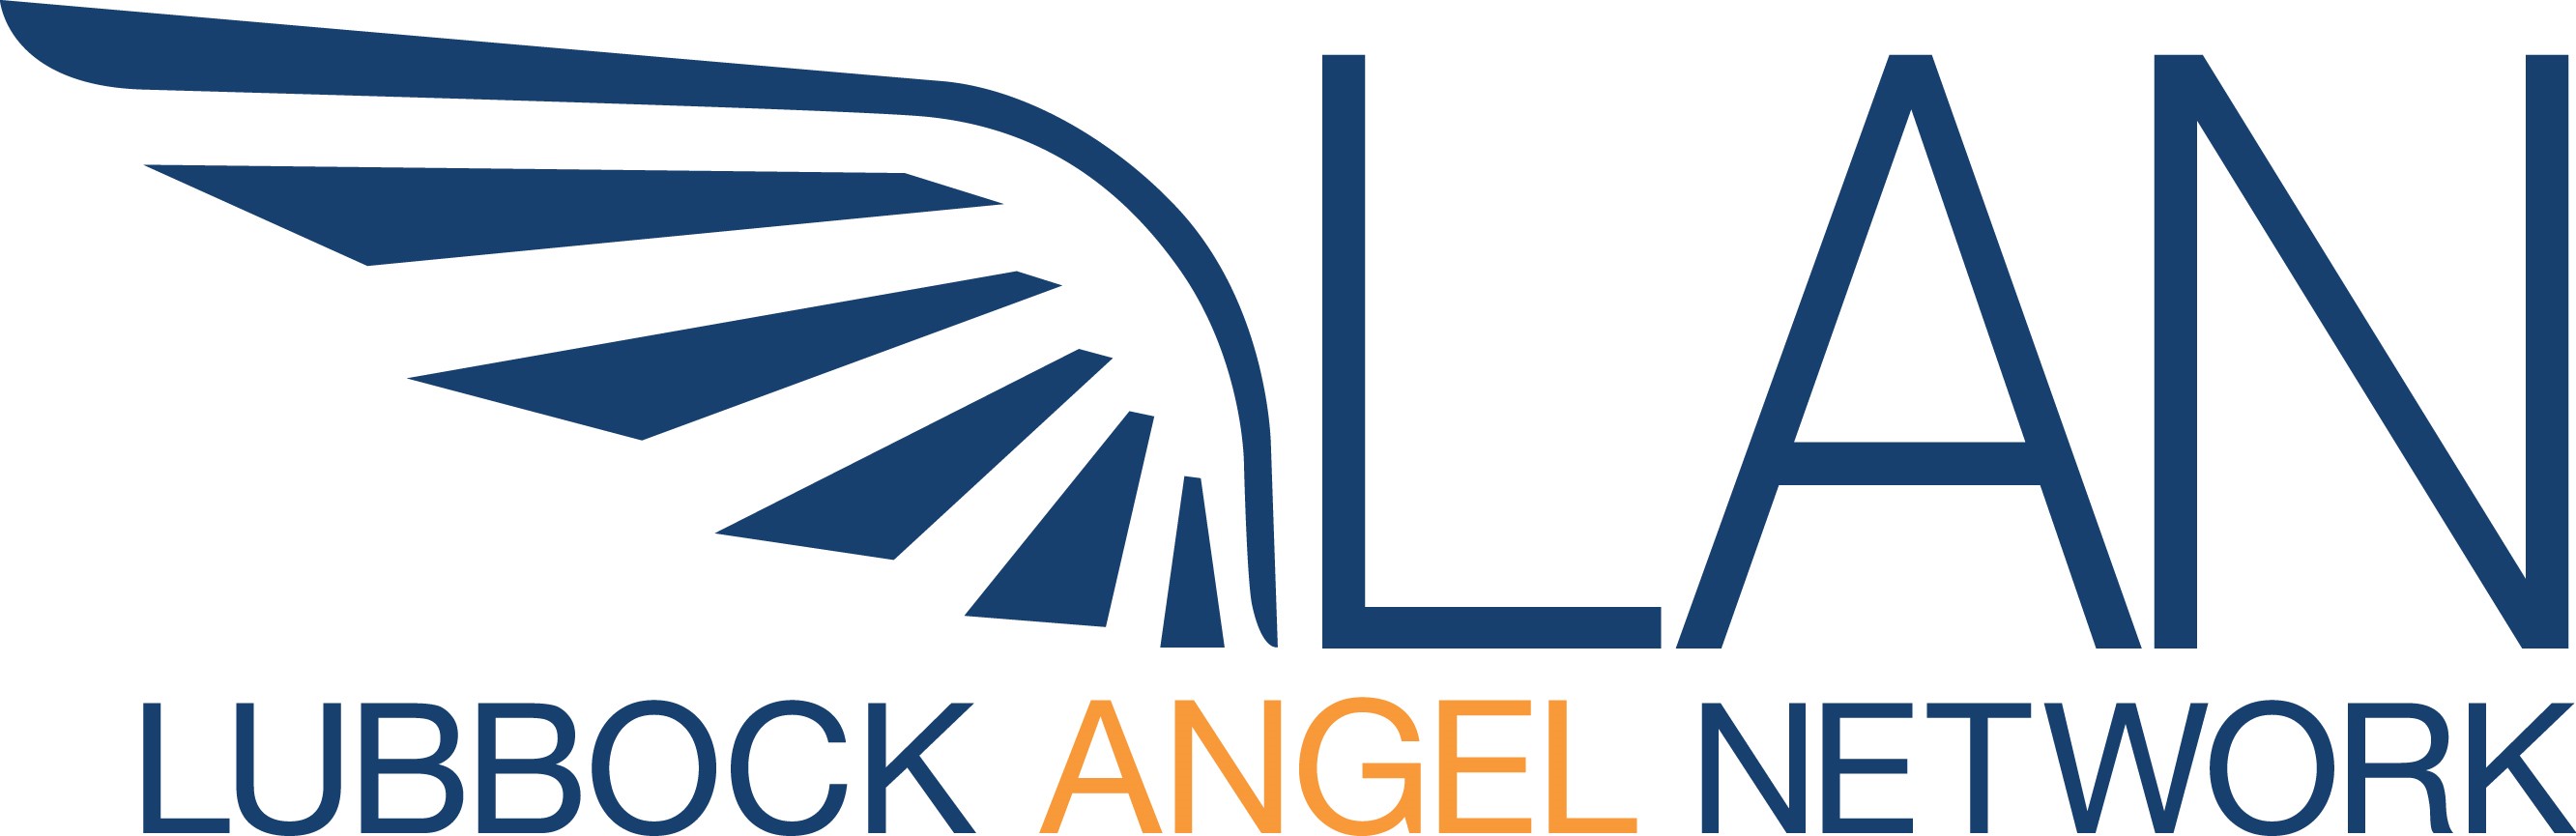 LAN logo, The Lubbock Angel Network (LAN) was formed in January 2015 as a means to provide seed and support capital for innovative start-ups in West Texas and beyond.